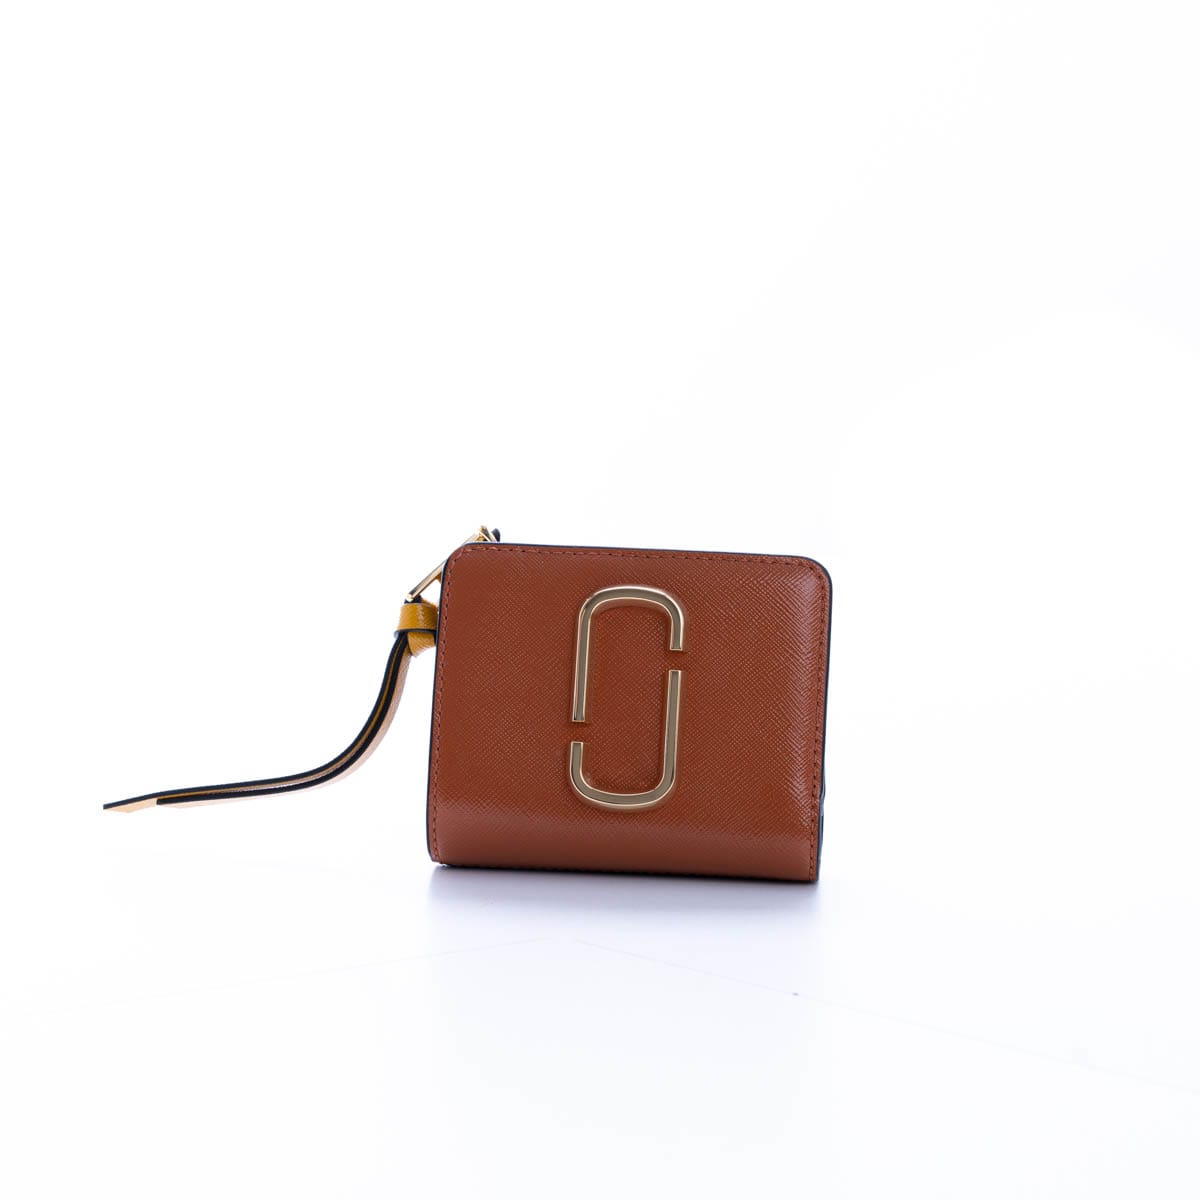 Marc Jacobs Wallet In Saddle Brown - Multicolor